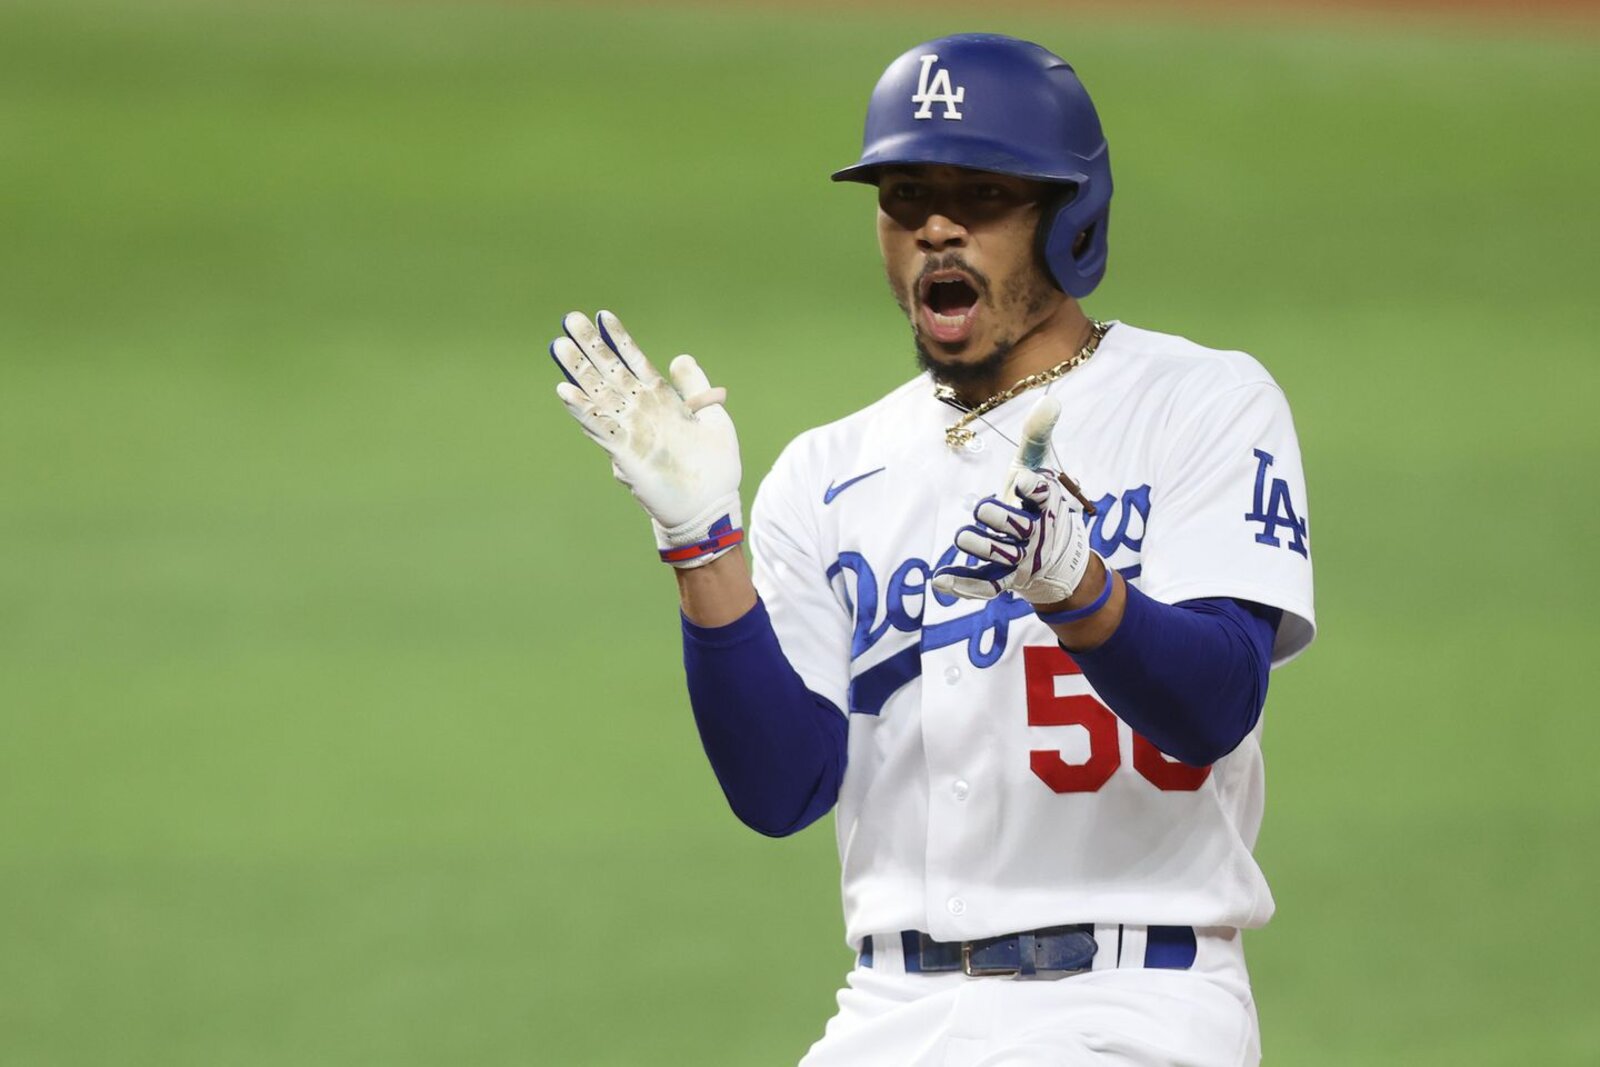 As the LA Dodgers continue towards a World Series Championship, many fans are looking to Mookie Betts for hope. Here's why he's the key to their success.